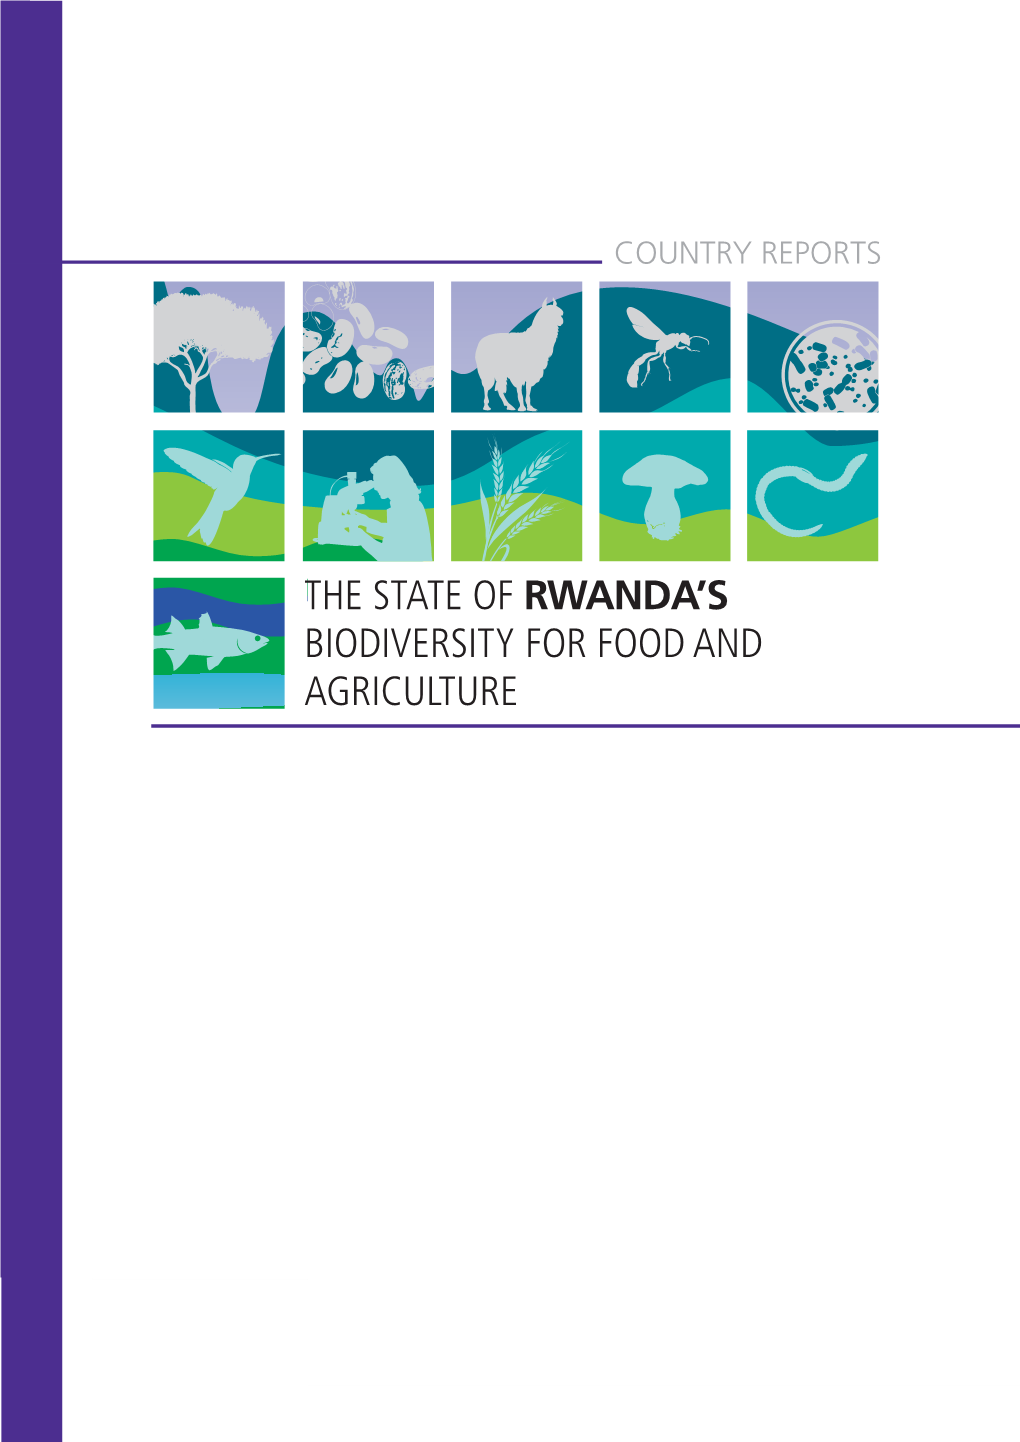 The State of Rwanda's Biodiversity for Food And